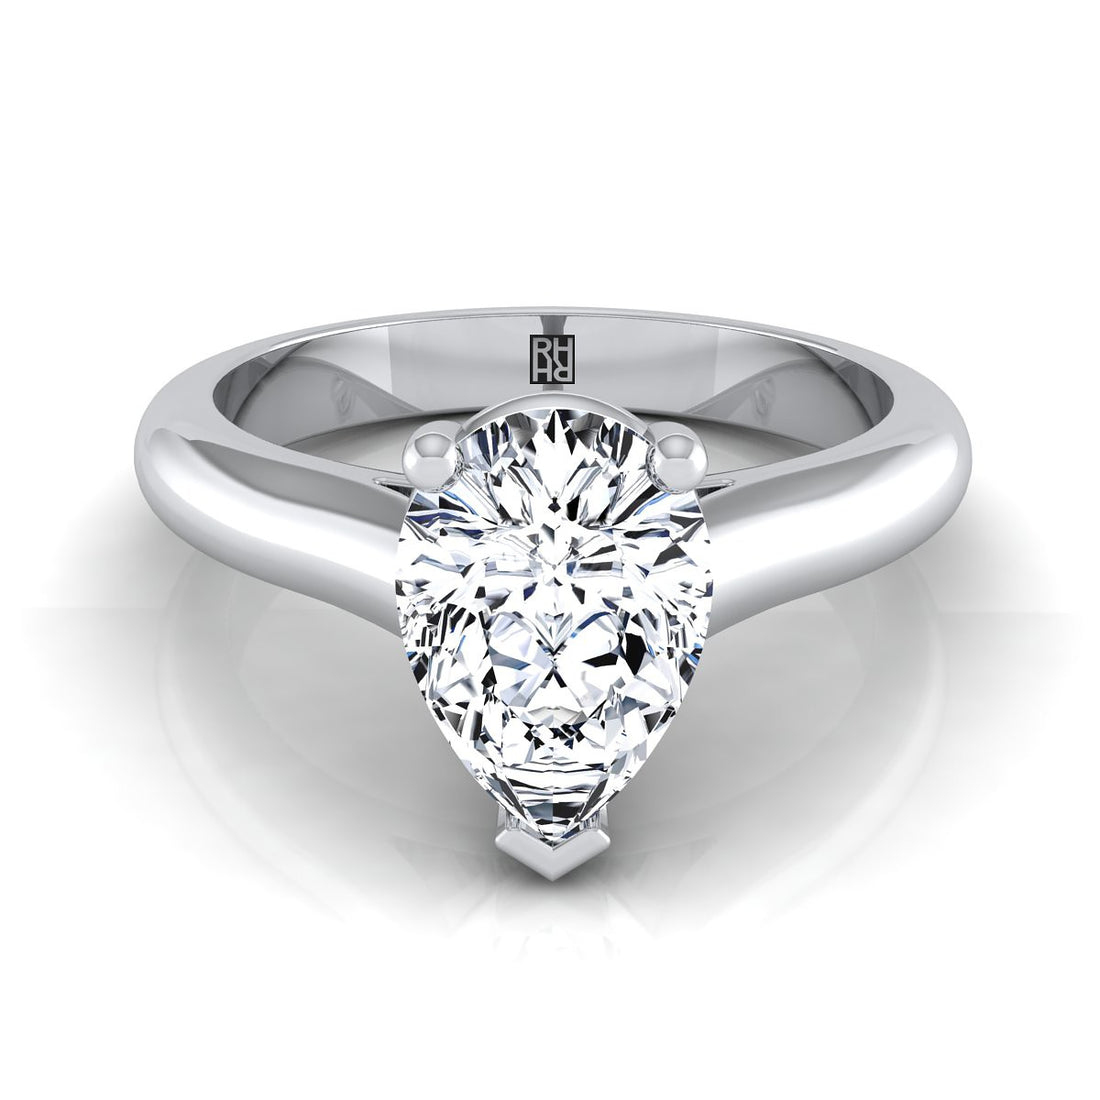 What Traditional Diamond Solitaire Rings Allude to?